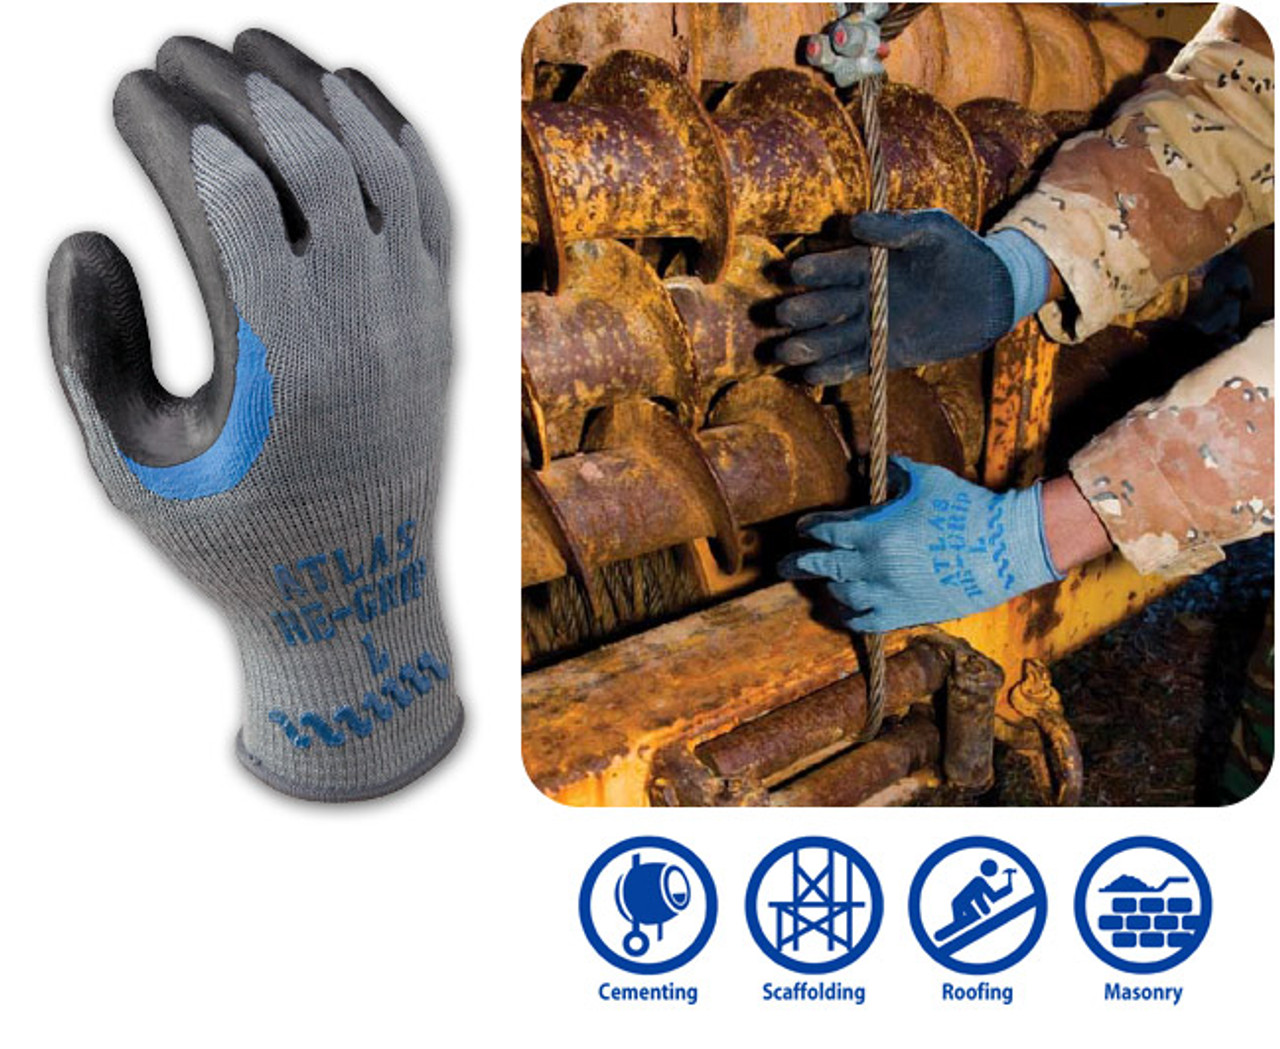 ATLAS RE-GRIP RUBBER-COATED GLOVES (PAIR)